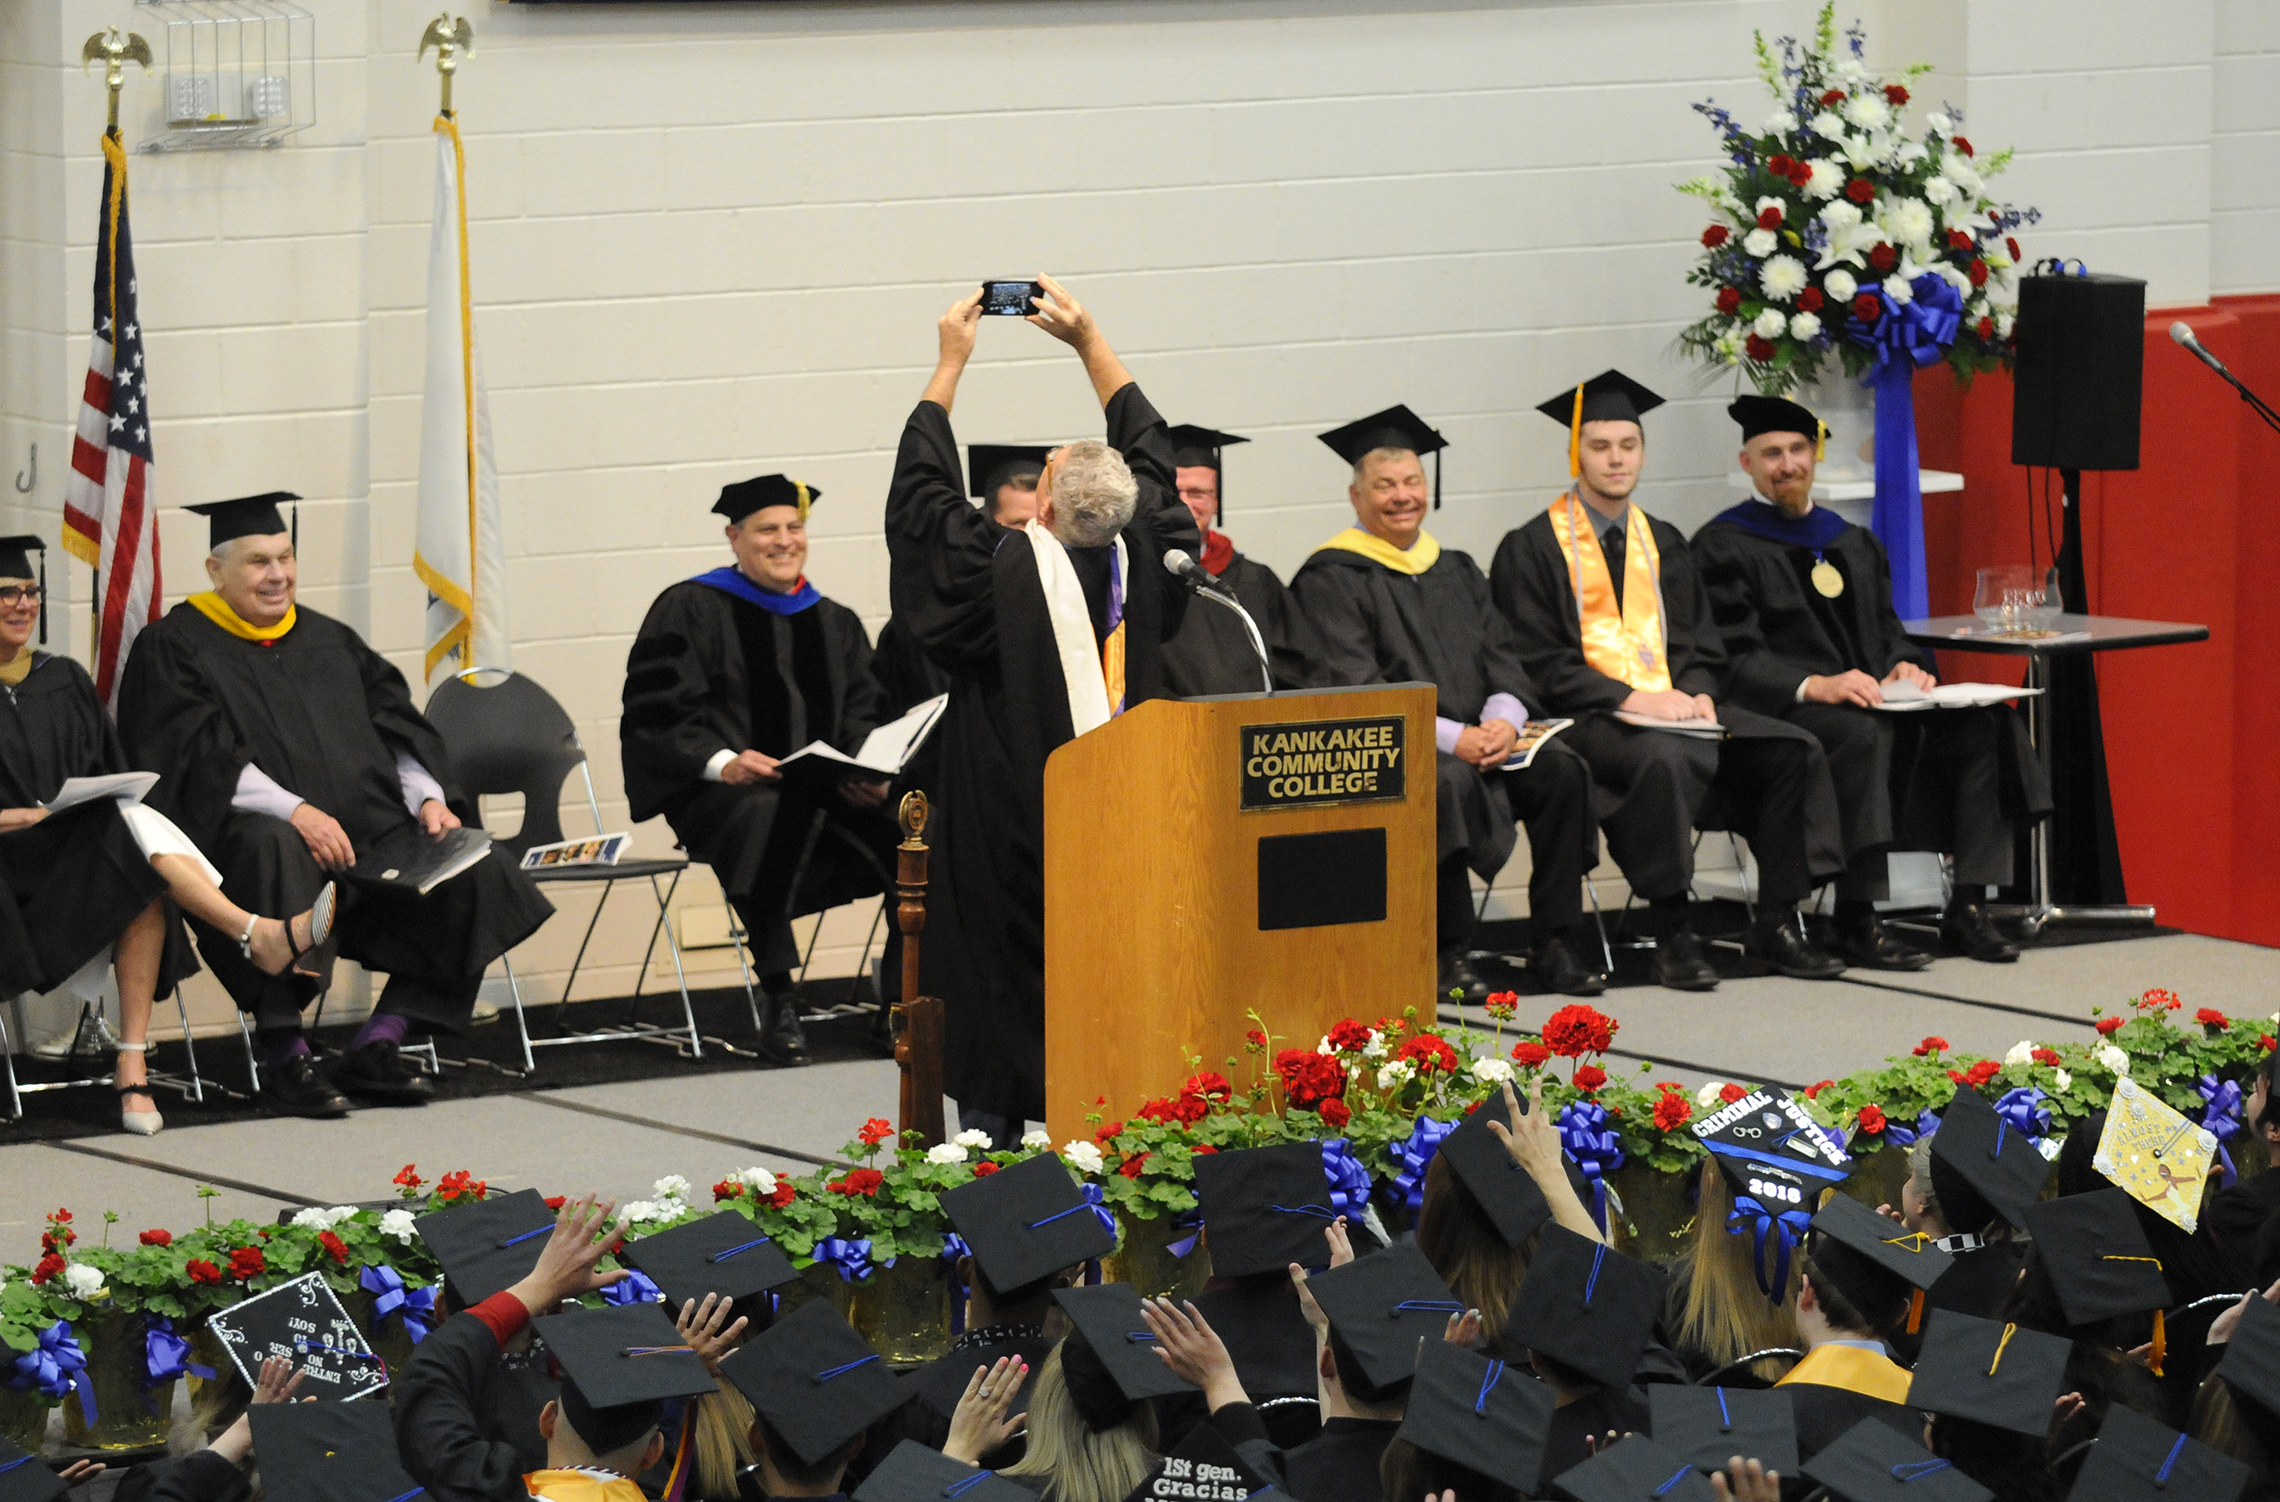  Commencement speaker Ed Emerson takes a selfie with the crowd Saturday during the Kankakee Community College graduation. Emerson, a political strategist, told the students “The key to success is to say yes.”    